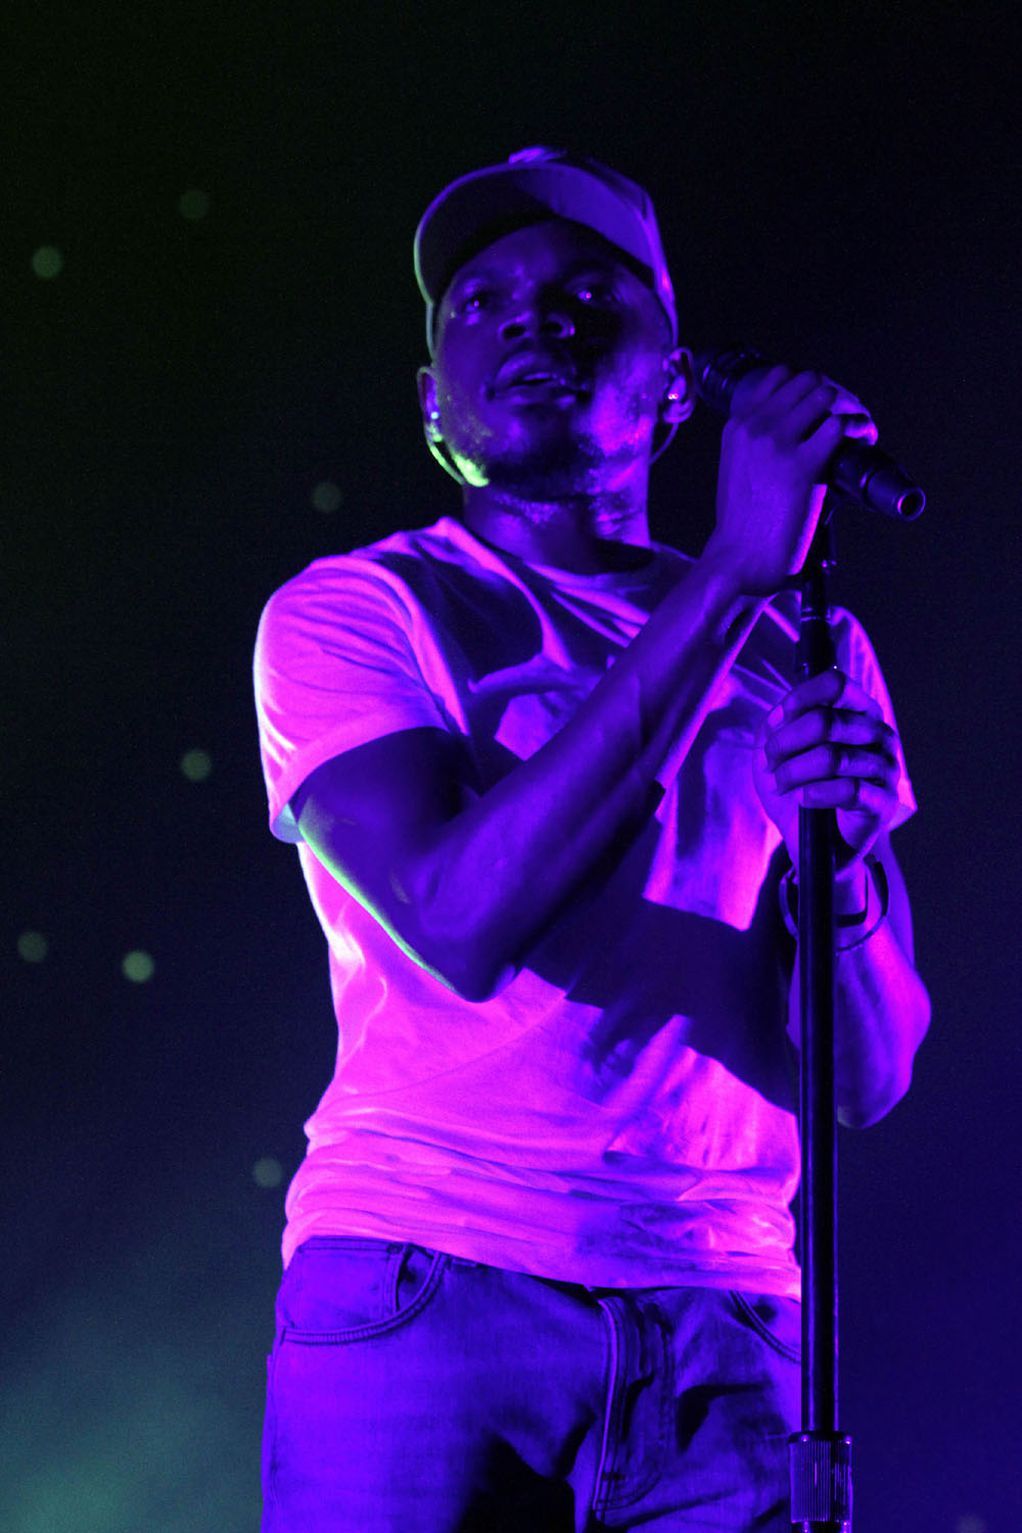 Chance The Rapper performs at the Tabernacle in Atlanta on Tuesday, July 15, 2014. - Chance the Rapper